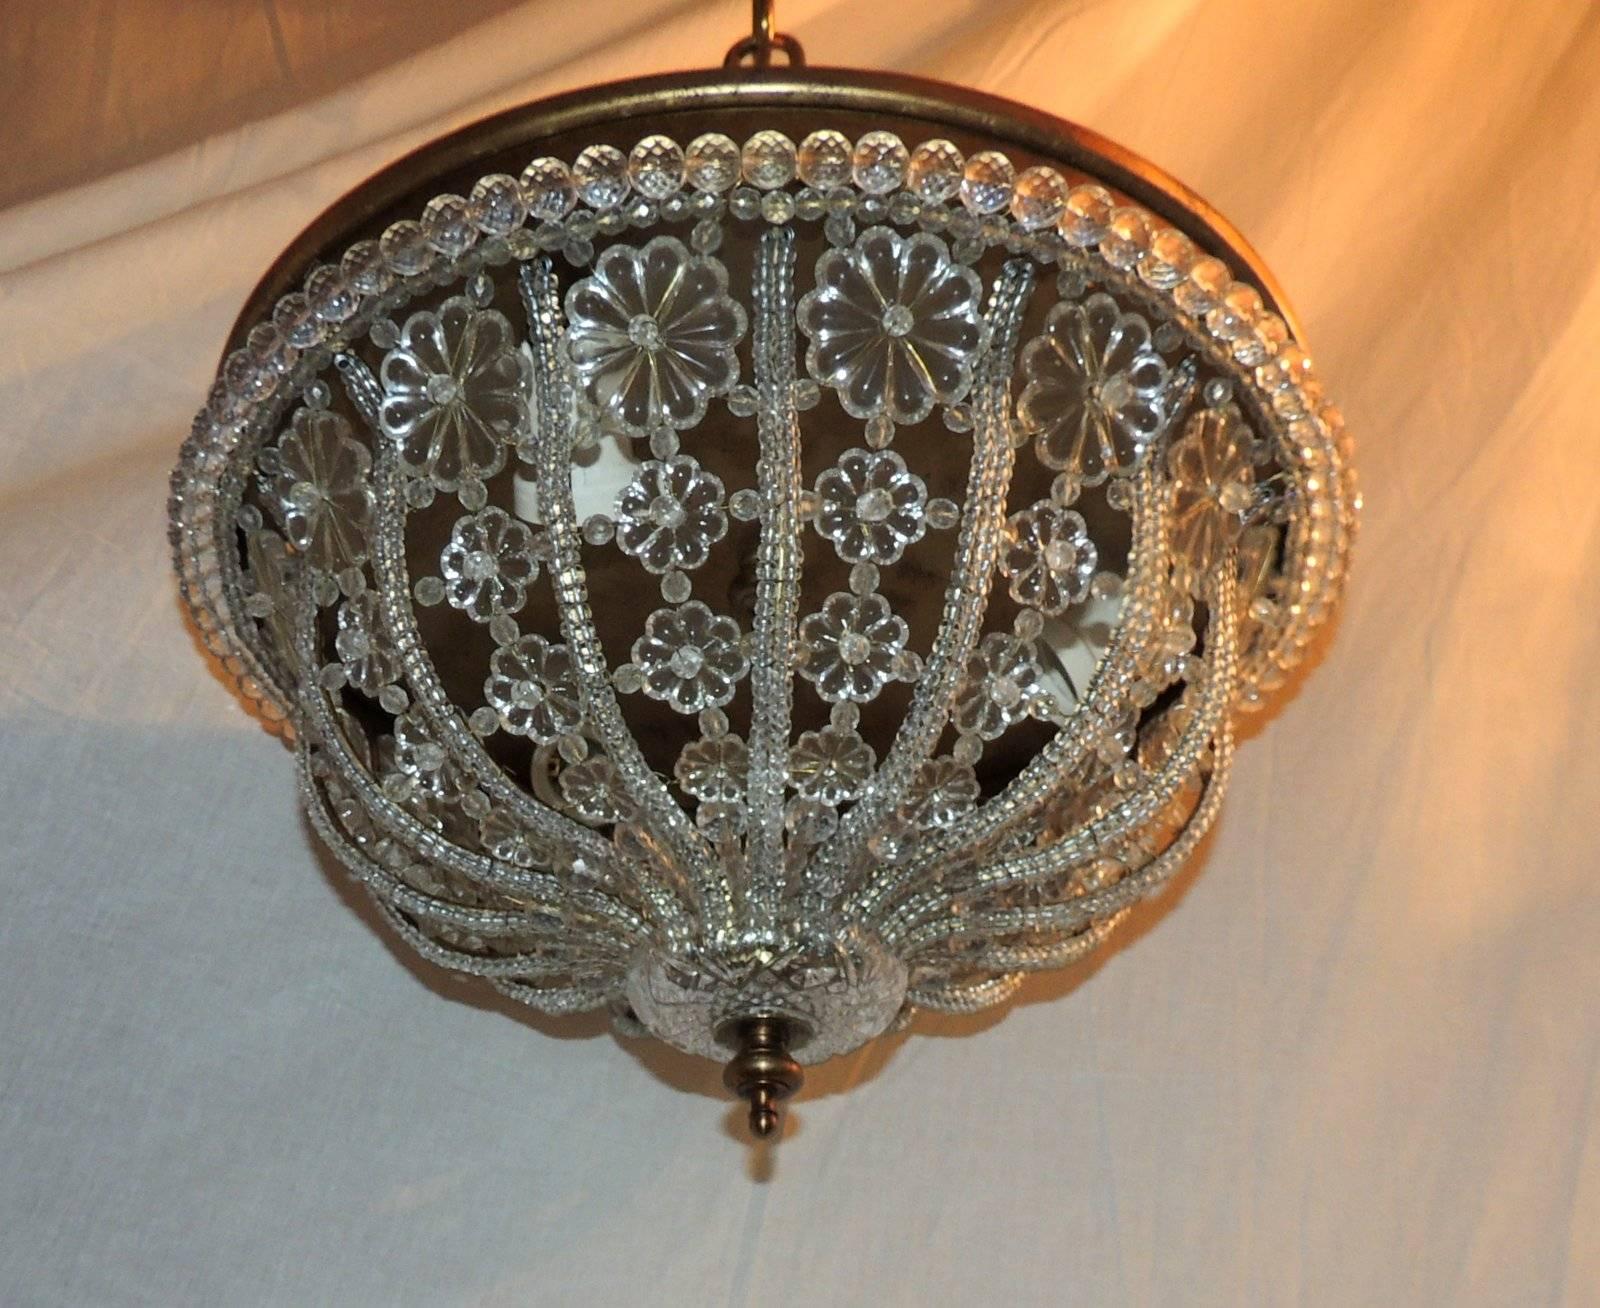 Wonderful crystal and bronze flush mount with crystal beaded trim and ascending crystal flowers. Has three Edison interior lights 75 watts each.

Pair Available
Sold Desperately
 
Measures: 15" W x 8" H.